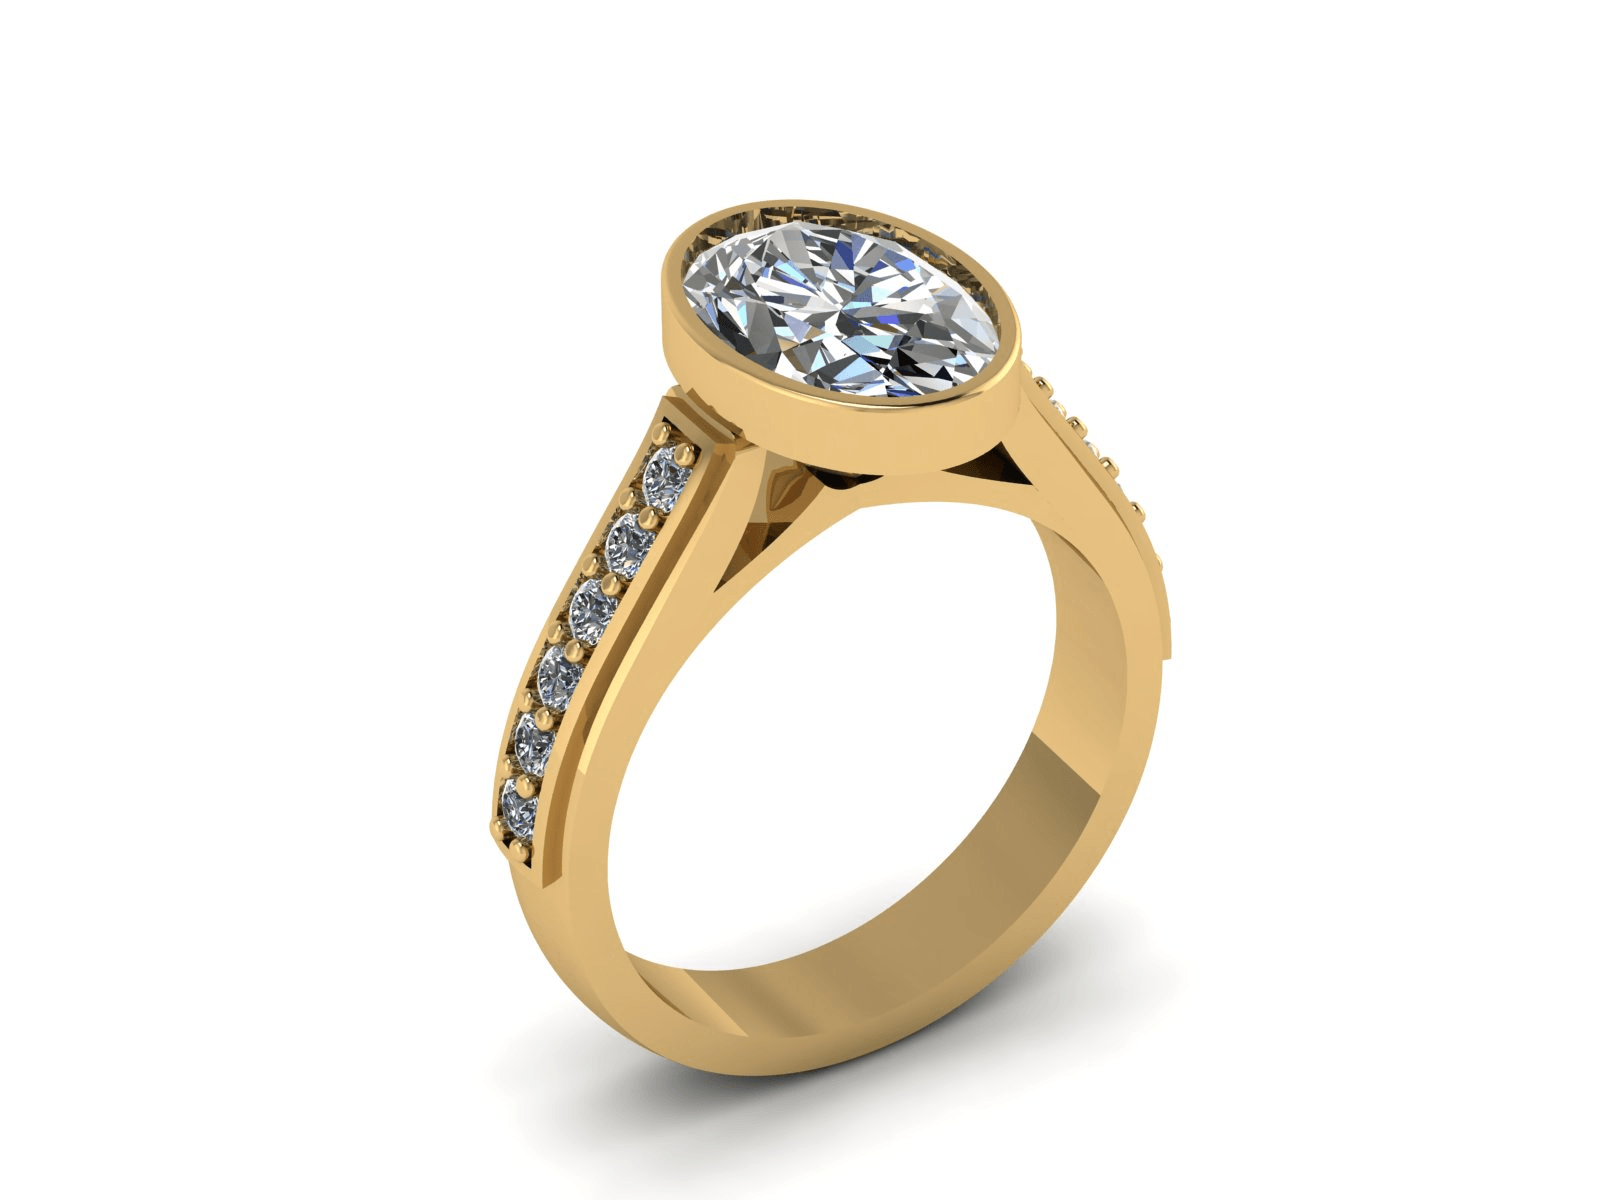 Custom Designed Bezel Set Engagement Ring Mounting with twelve 1.9mm natural round brilliant cut diamond melee totaling 0.30ct - F-G color and VS clarity in 14kt Yellow Gold - Size 6.5 - The Rutile Ltd